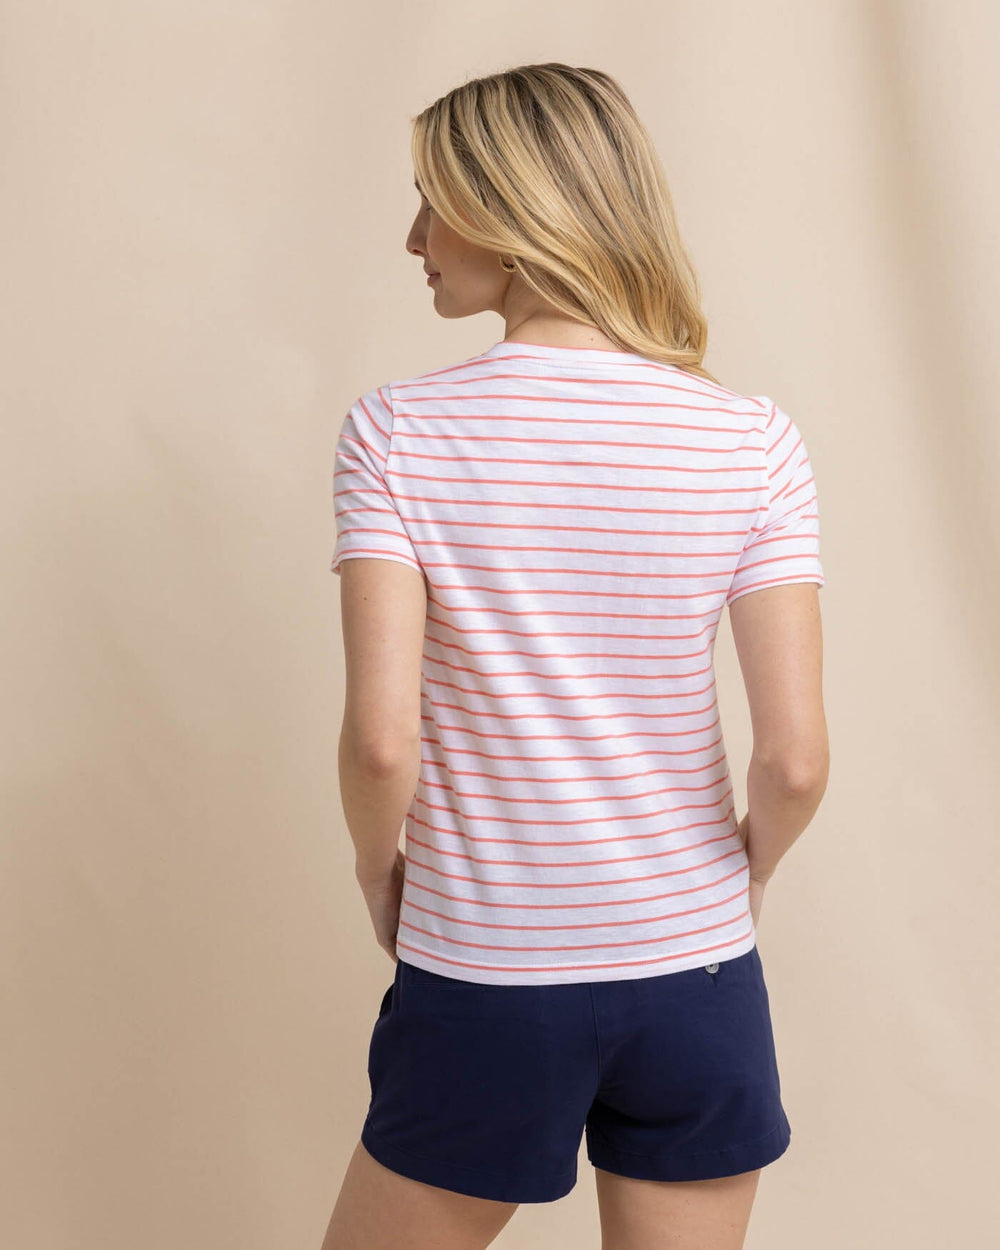 The back view of the Southern Tide Sun Farer Stripe Crew Neck T-Shirt by Southern Tide - Conch Shell